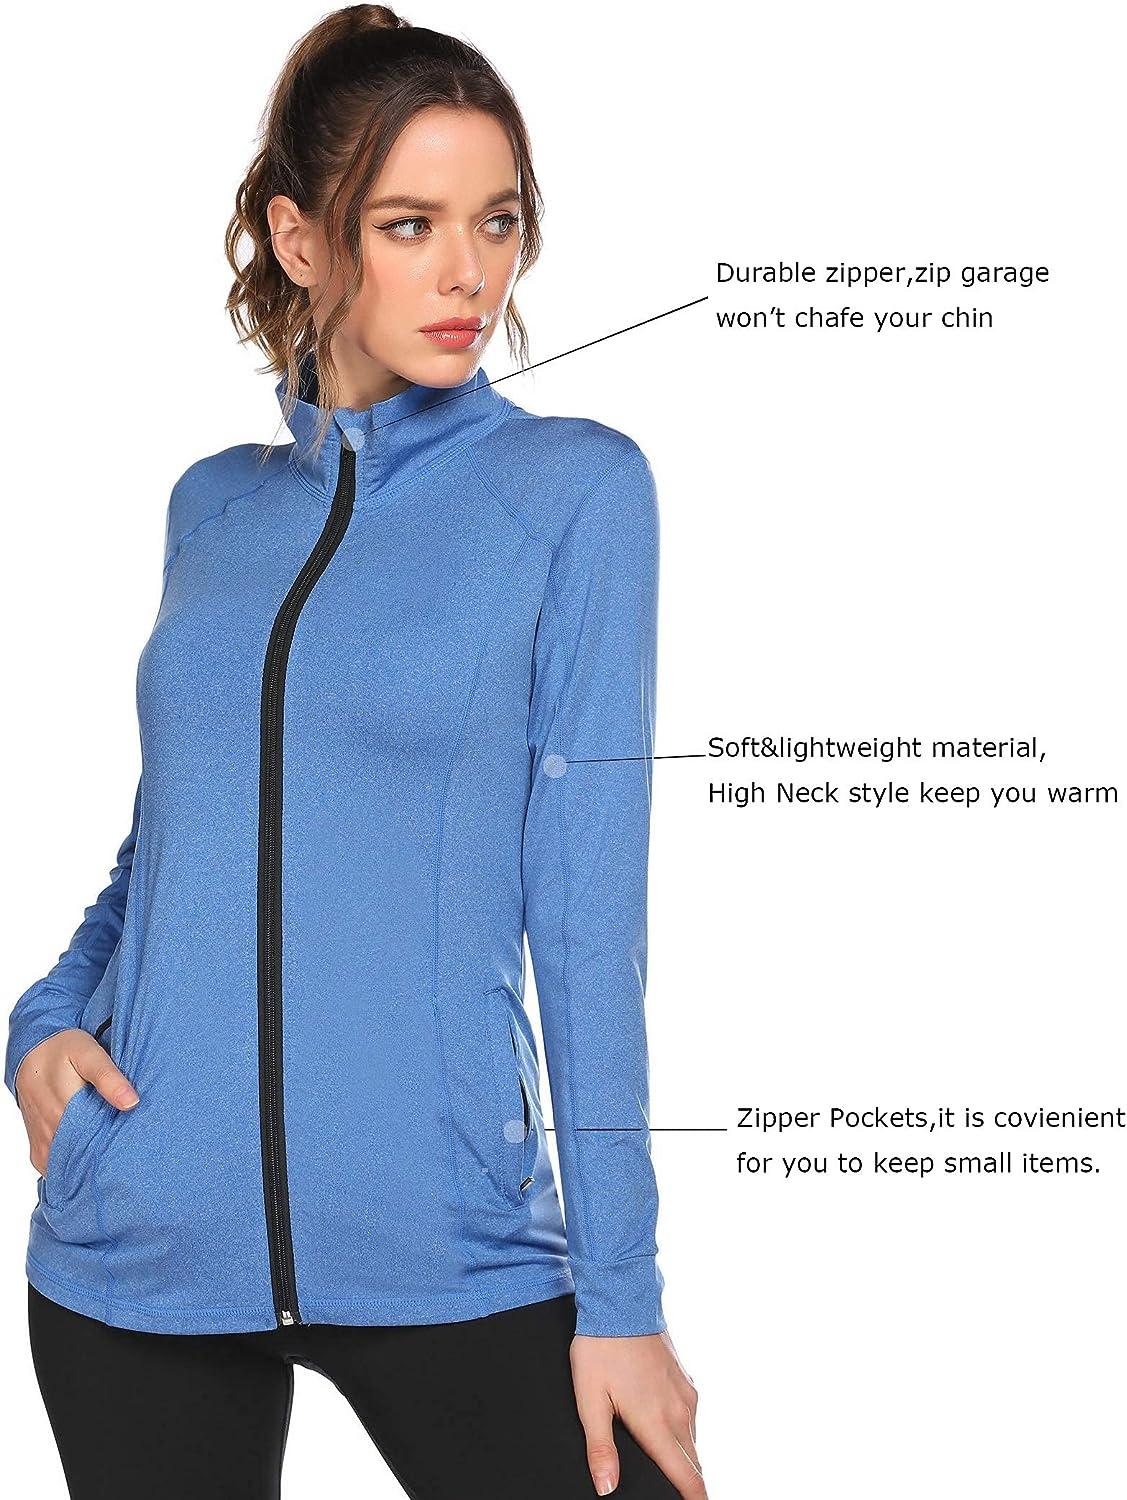 Solid Color Comprehensive Training Yoga Coat High Neck Fitness Women  Fitness Jacket Top Zipper Long Sleeve Wear Soft Breathable